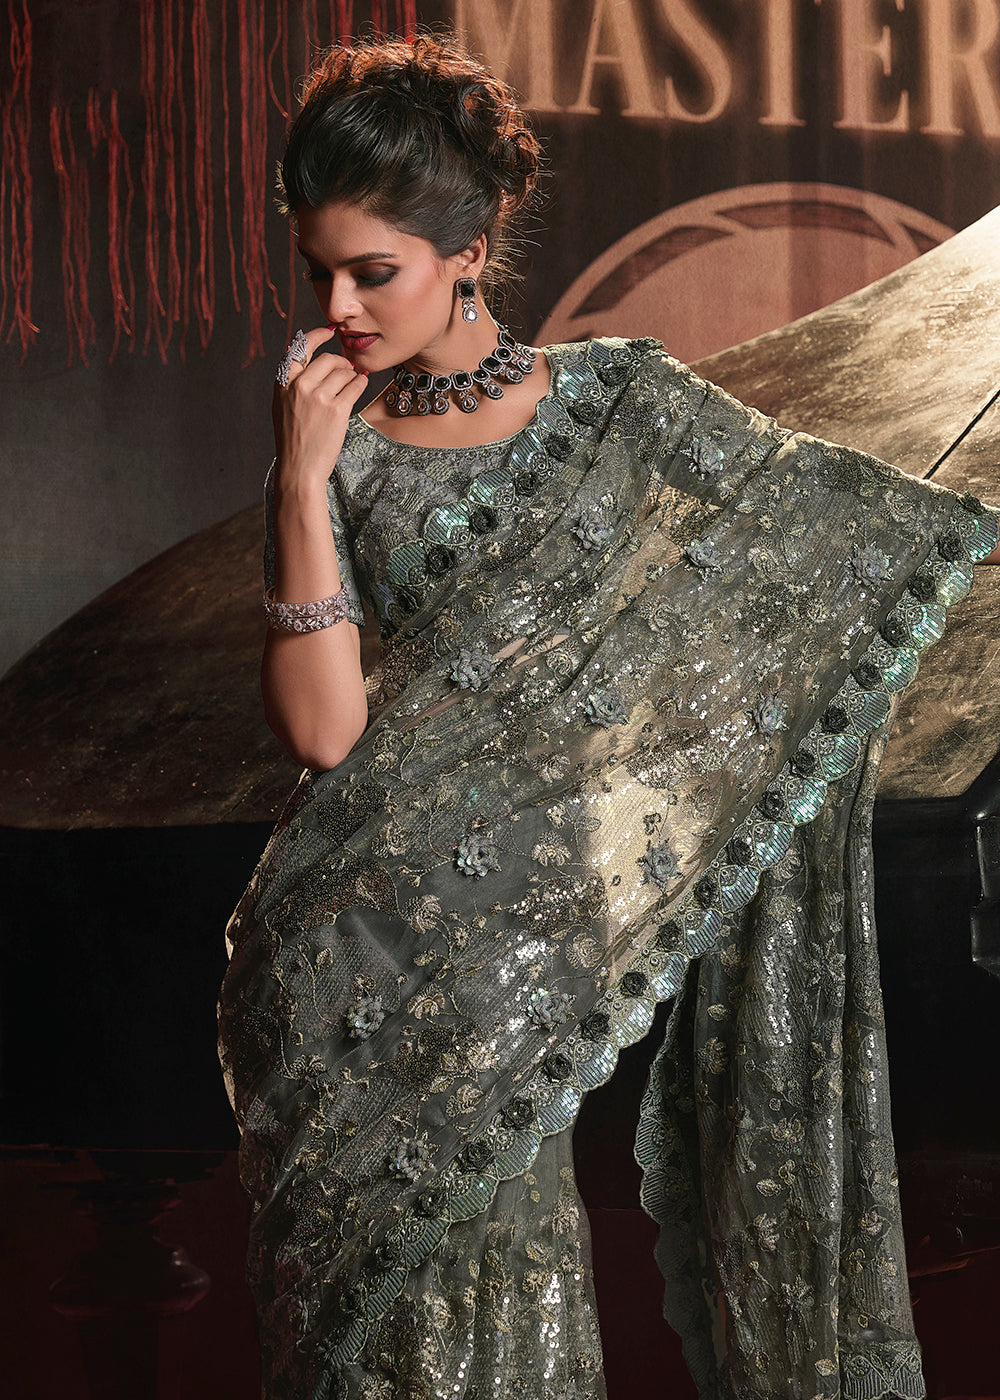 Shop Now Wedding Party Mehndi Green Net Embroidered Designer Saree from Empress Clothing in USA, UK, Canada & Worldwide. 